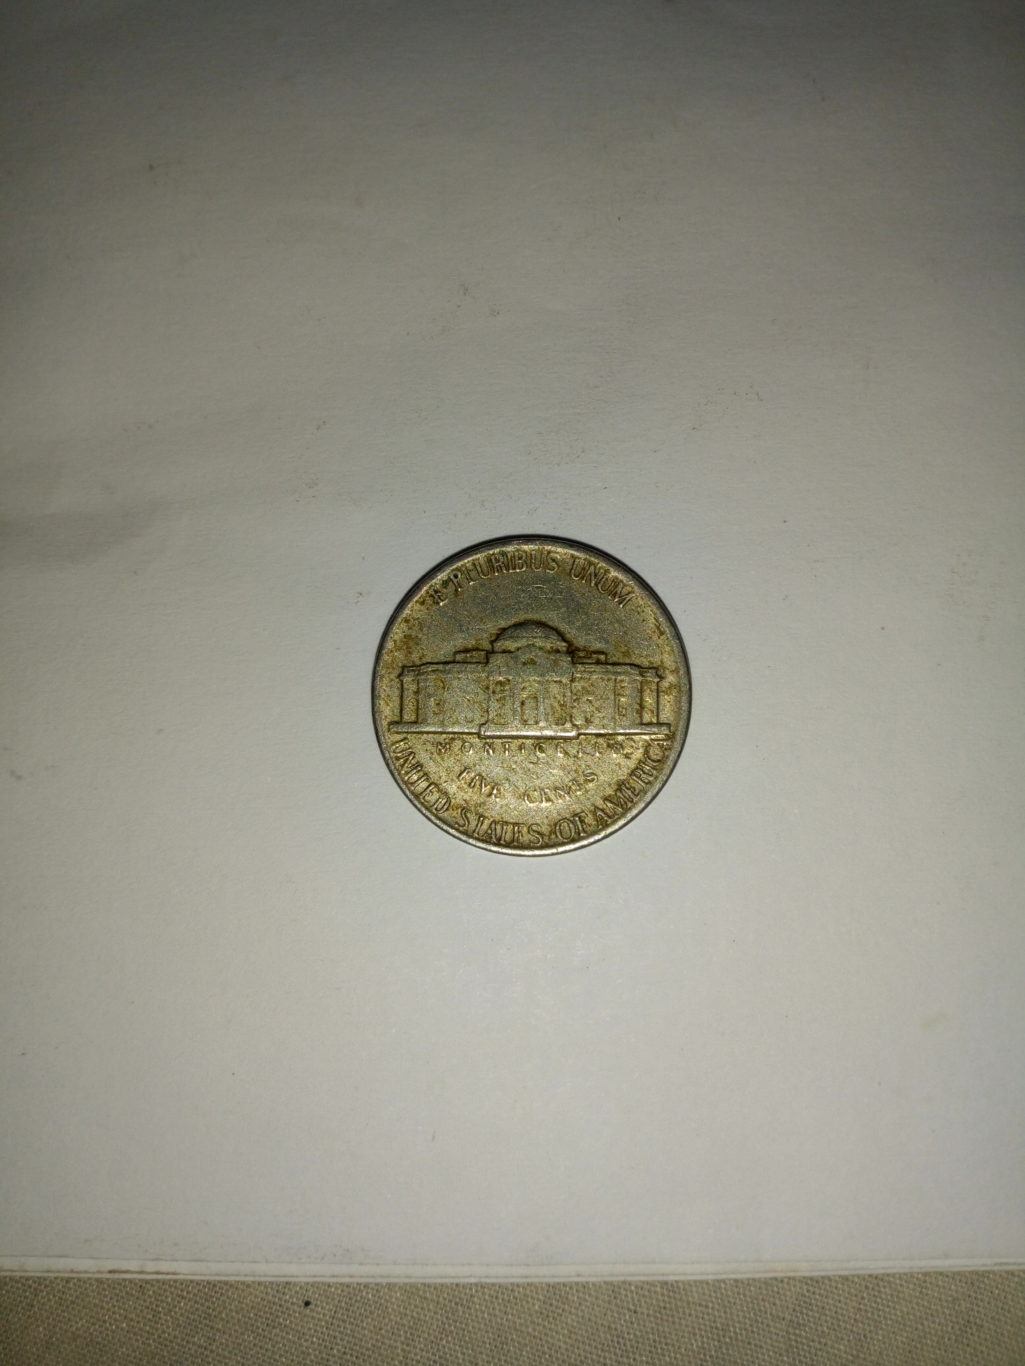 1982_ united states of America 5 cents